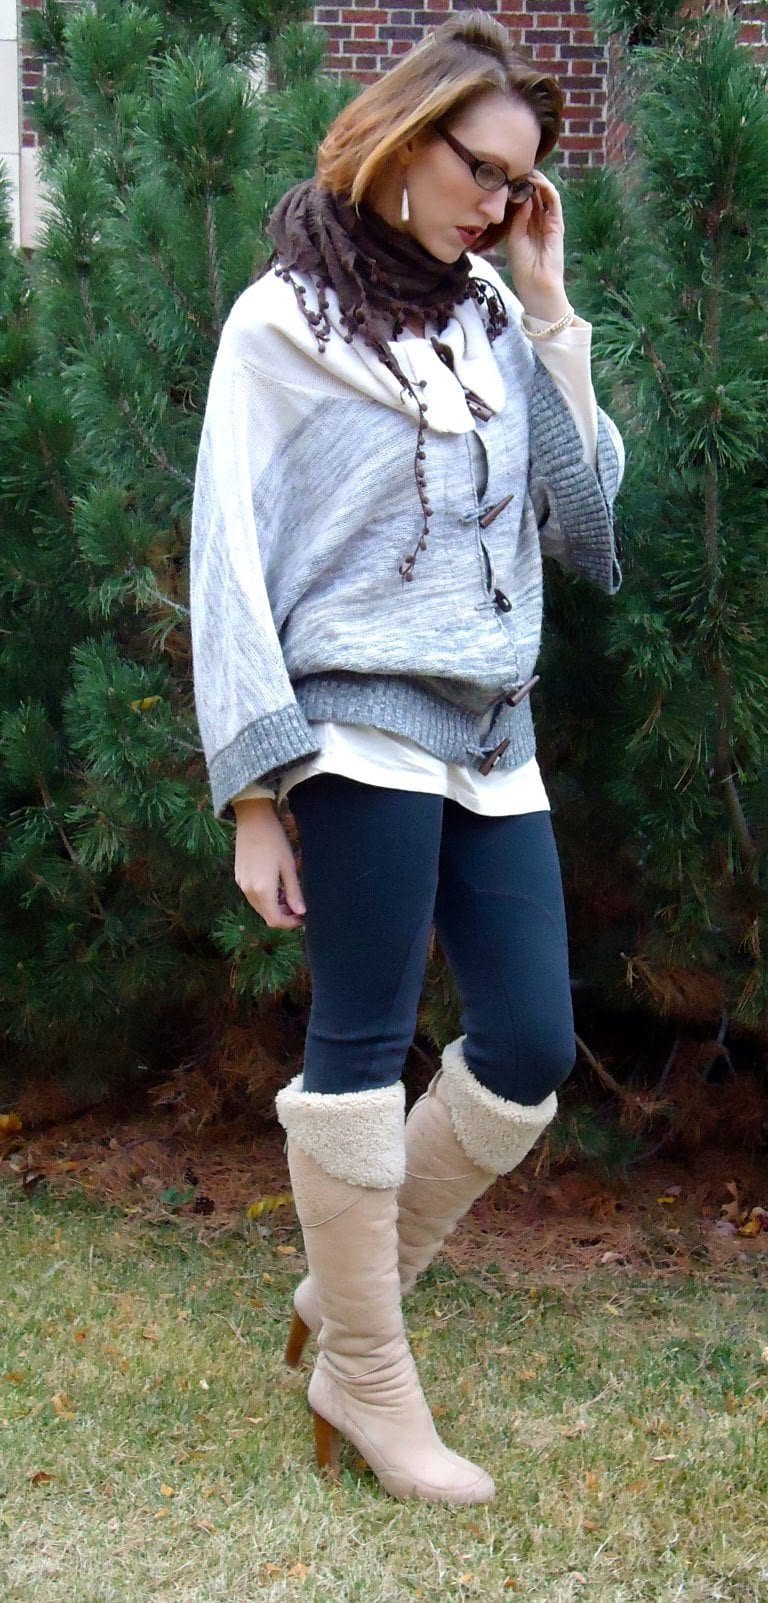 How to Wear Shearling Boots- 35 Outfits with Shearling Boots